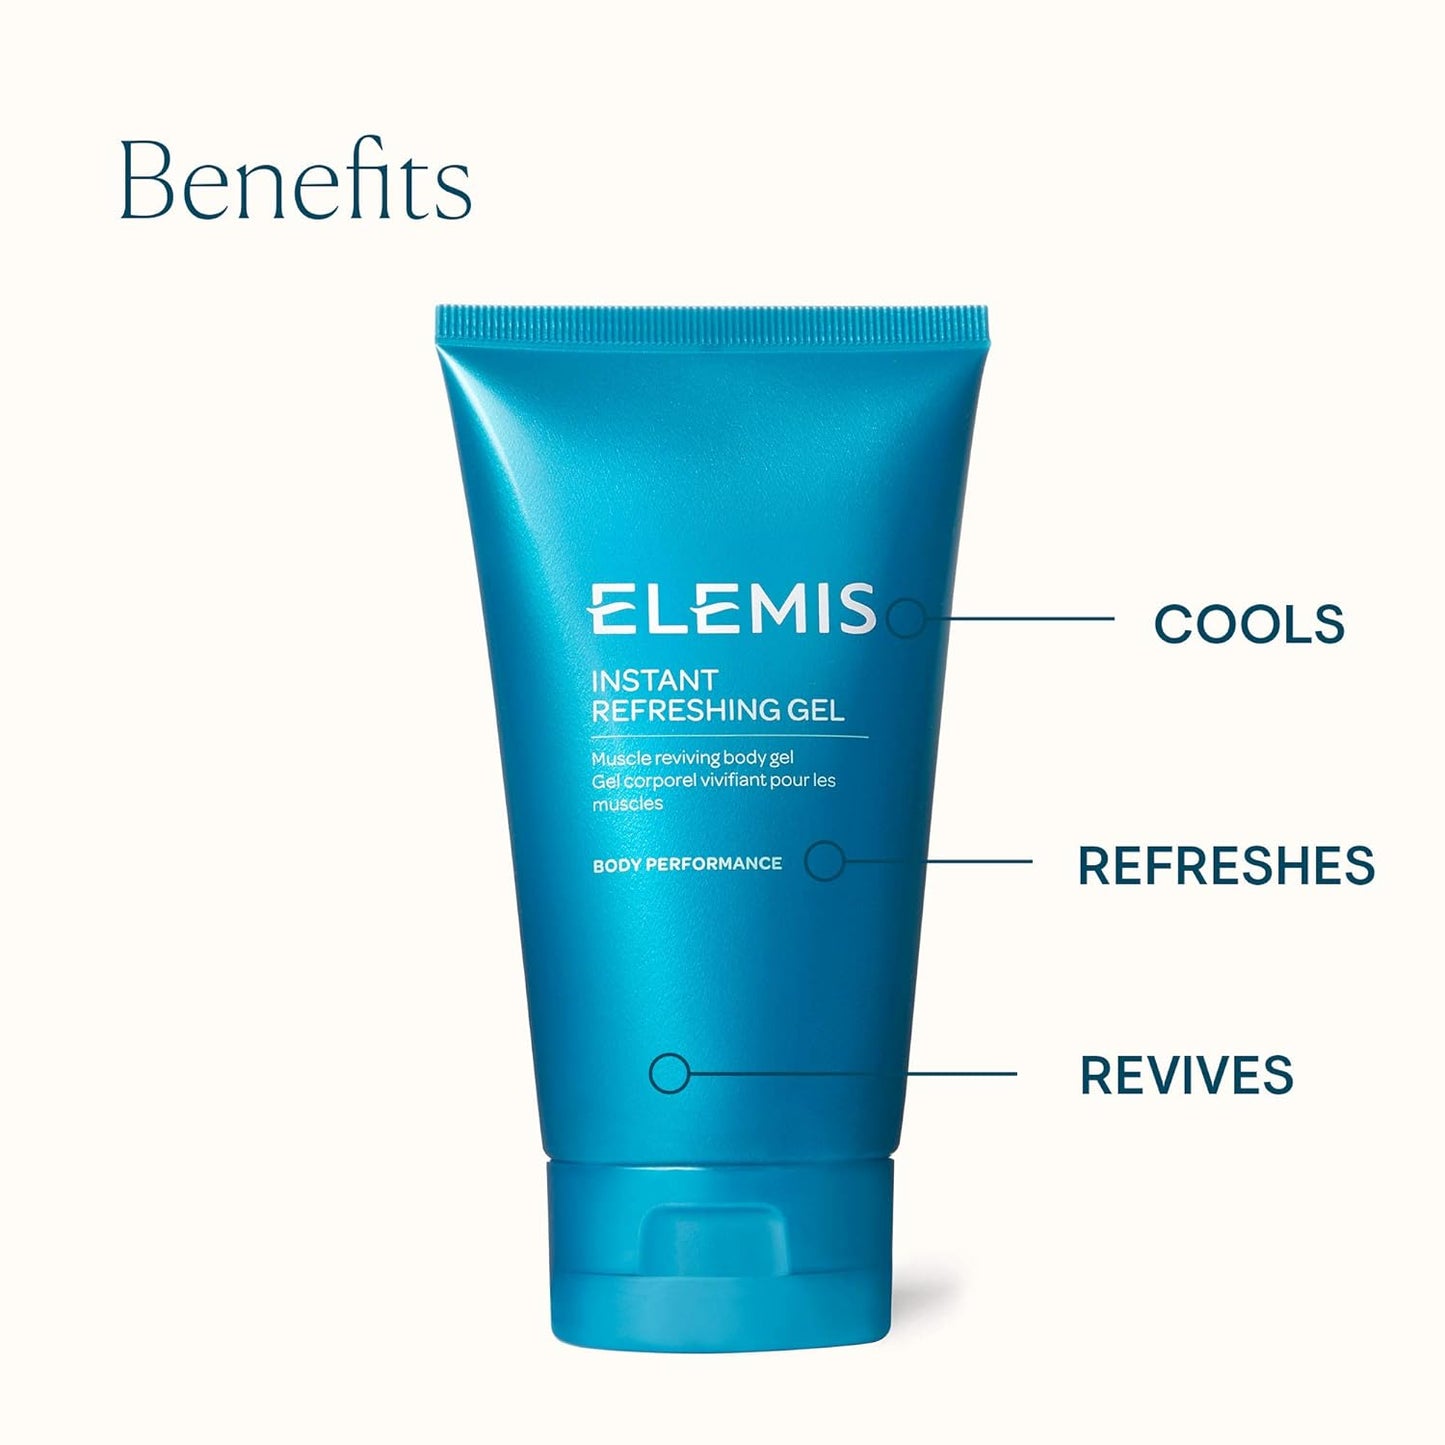 ELEMIS Instant Refreshing Gel, Muscle Reviving Body Gel Cools and Helps to Ease Aches, Pains and Tension with Arnica and Menthol | 150 mL